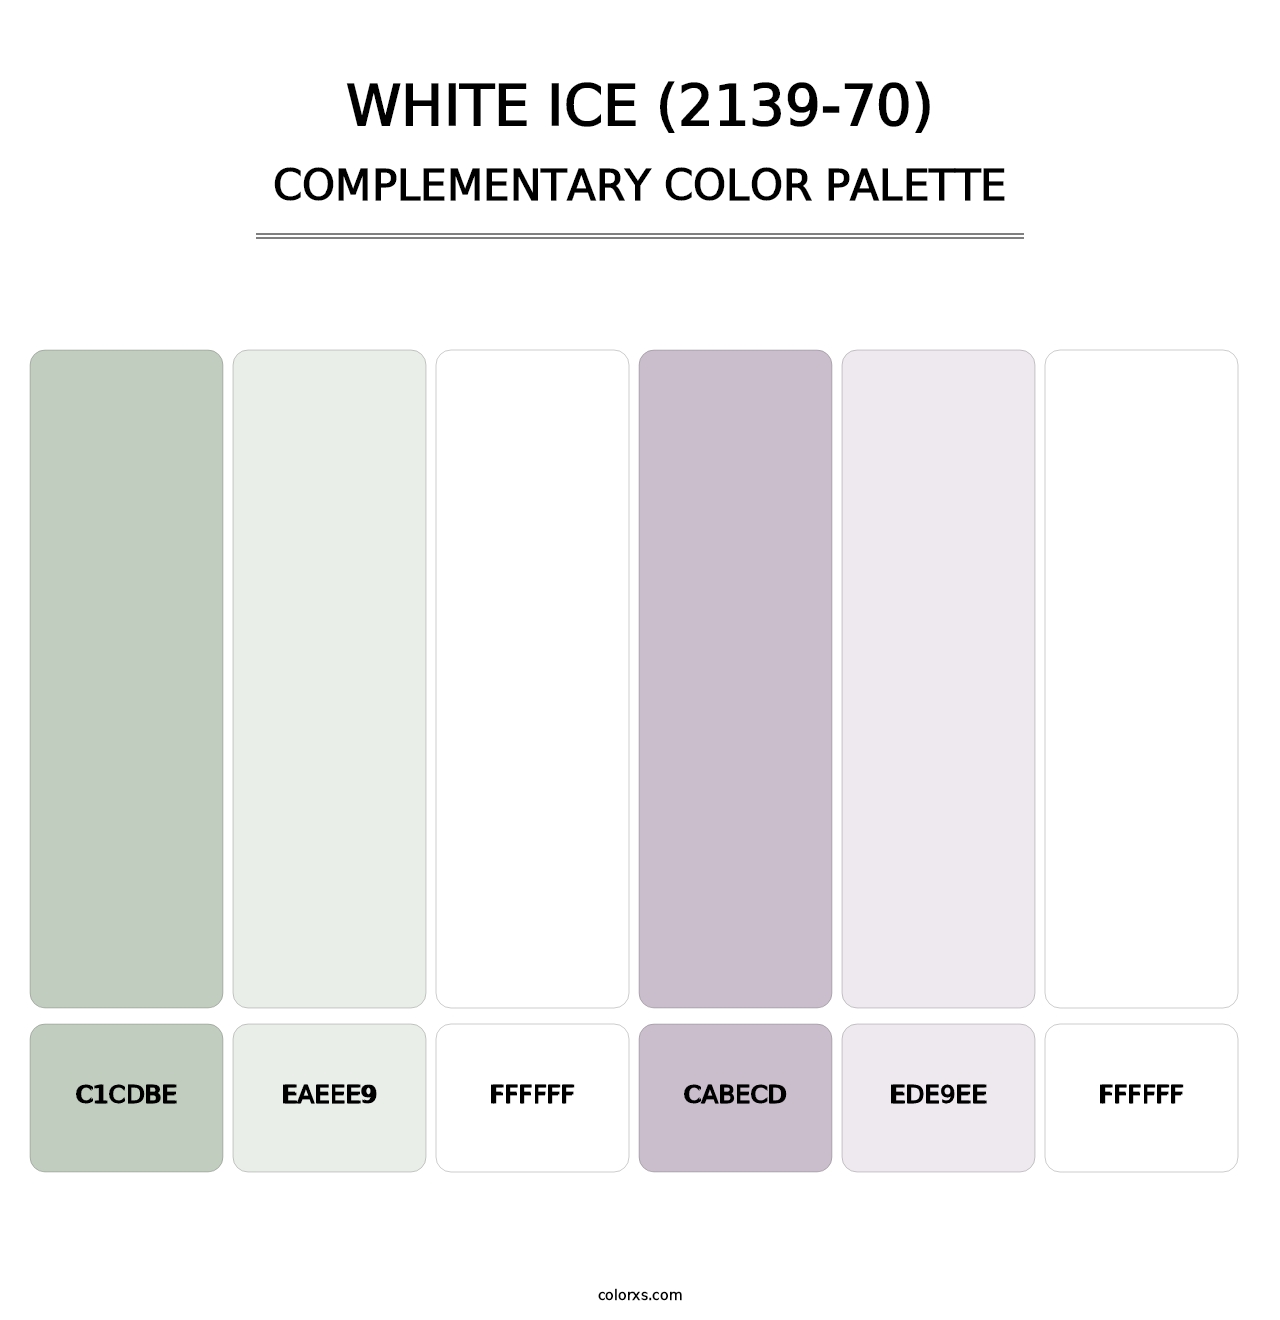 White Ice (2139-70) - Complementary Color Palette